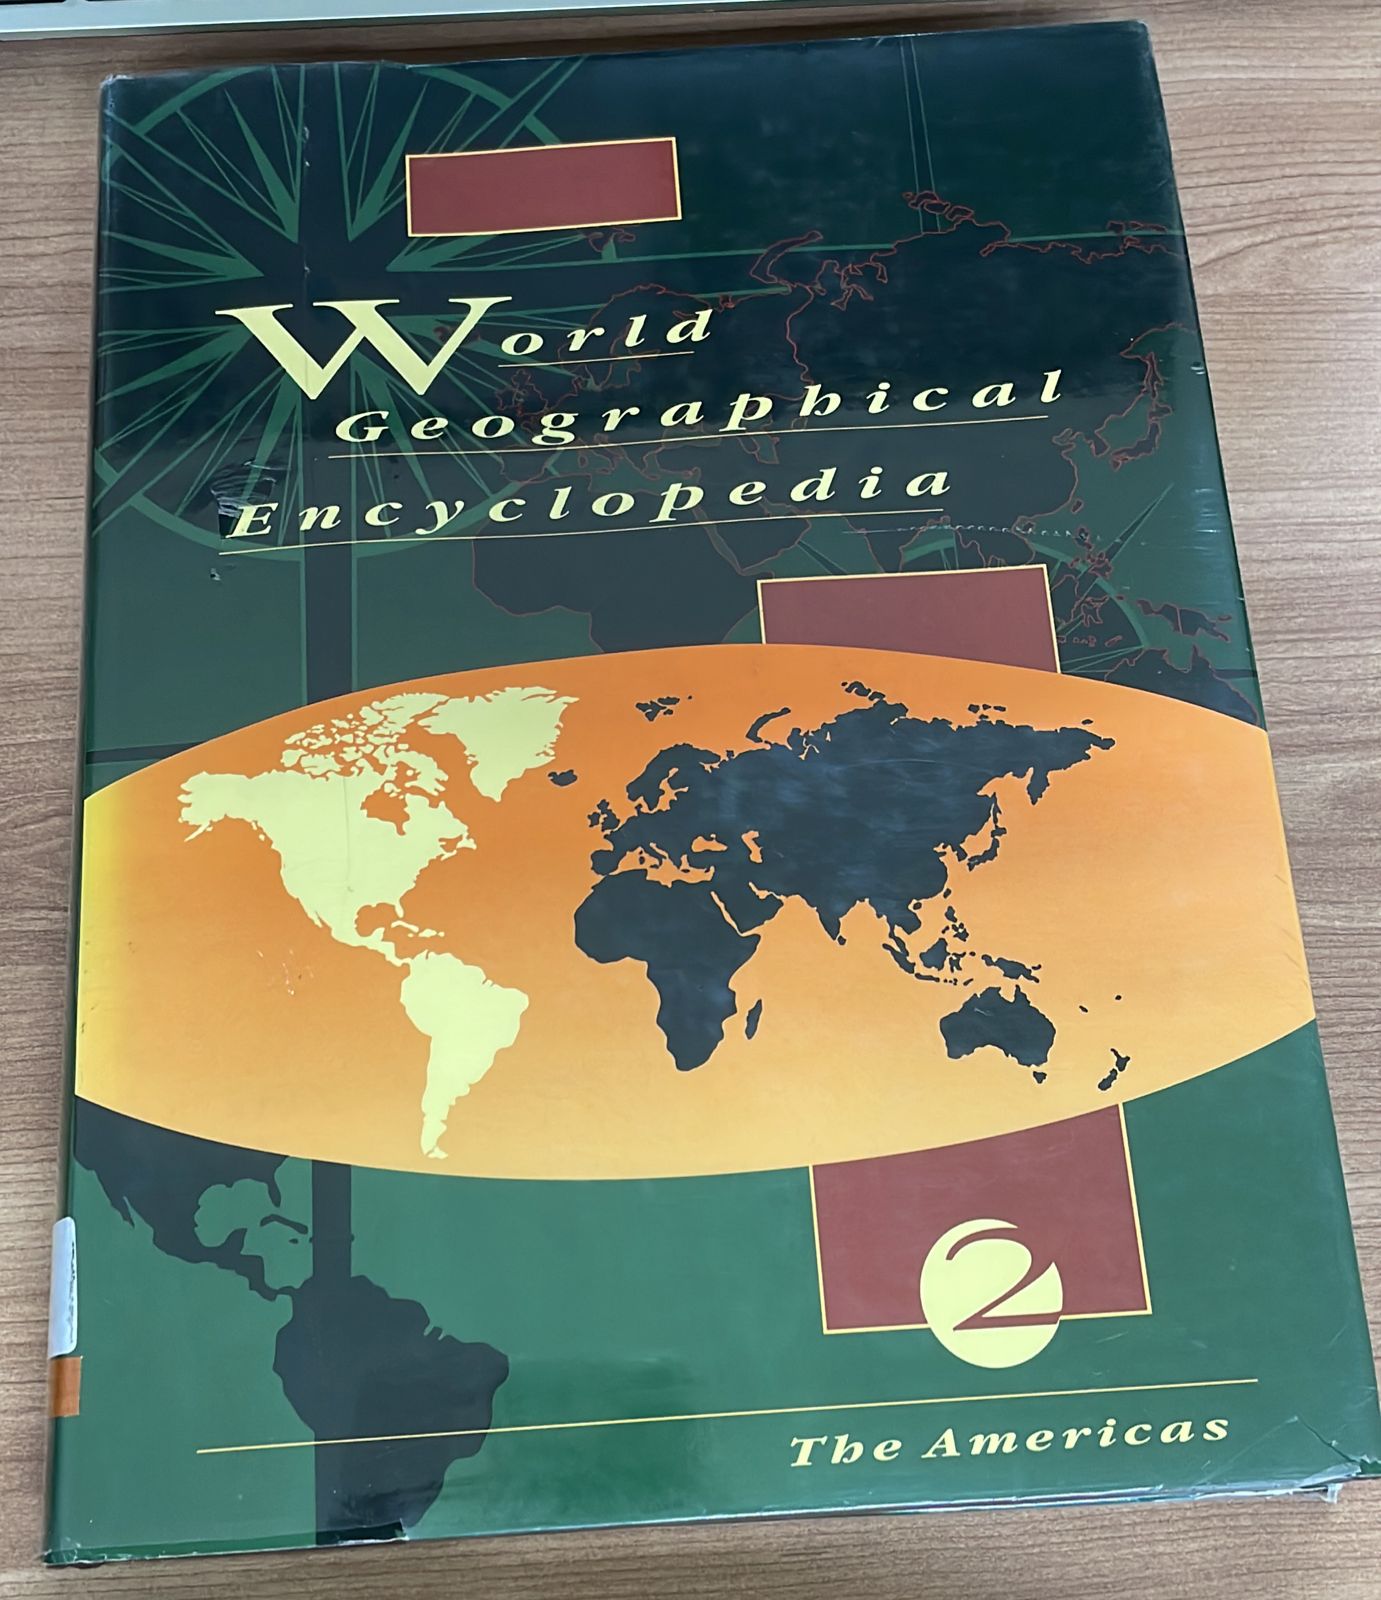 World Geographical Encyclopedia Volume 2 :  Americas